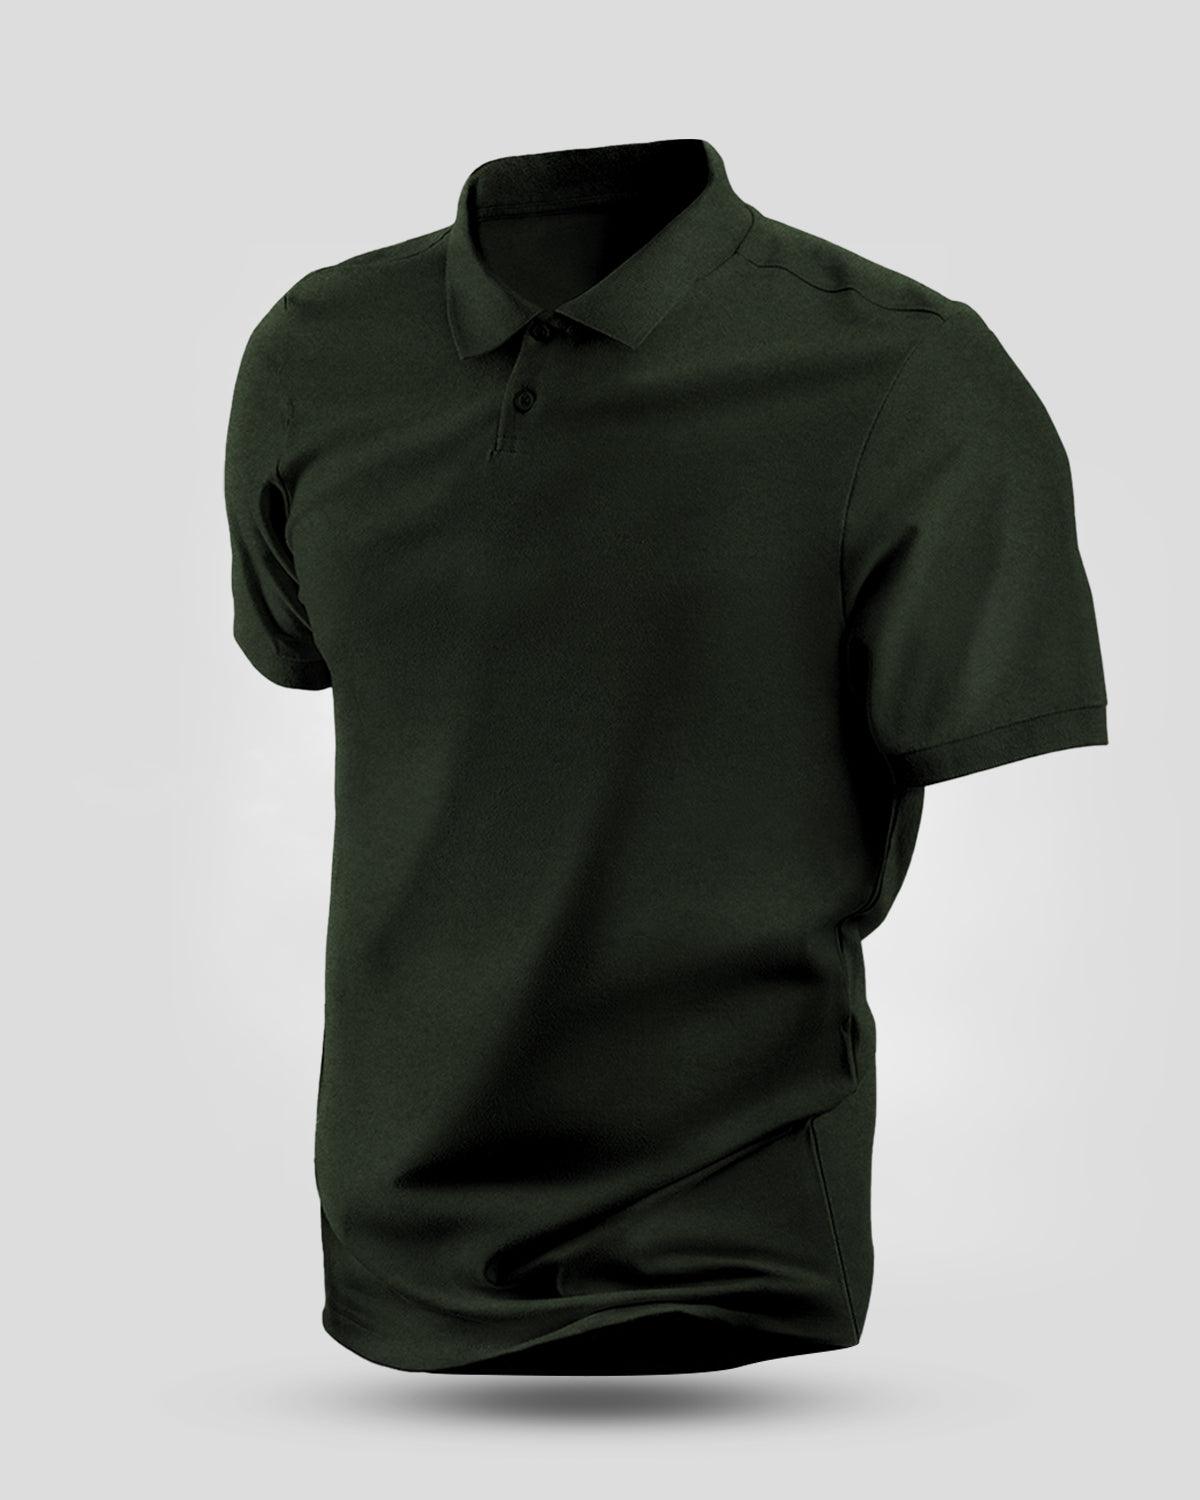 Solid Olive Green Polo - TagMyTee - Polo T-Shirt